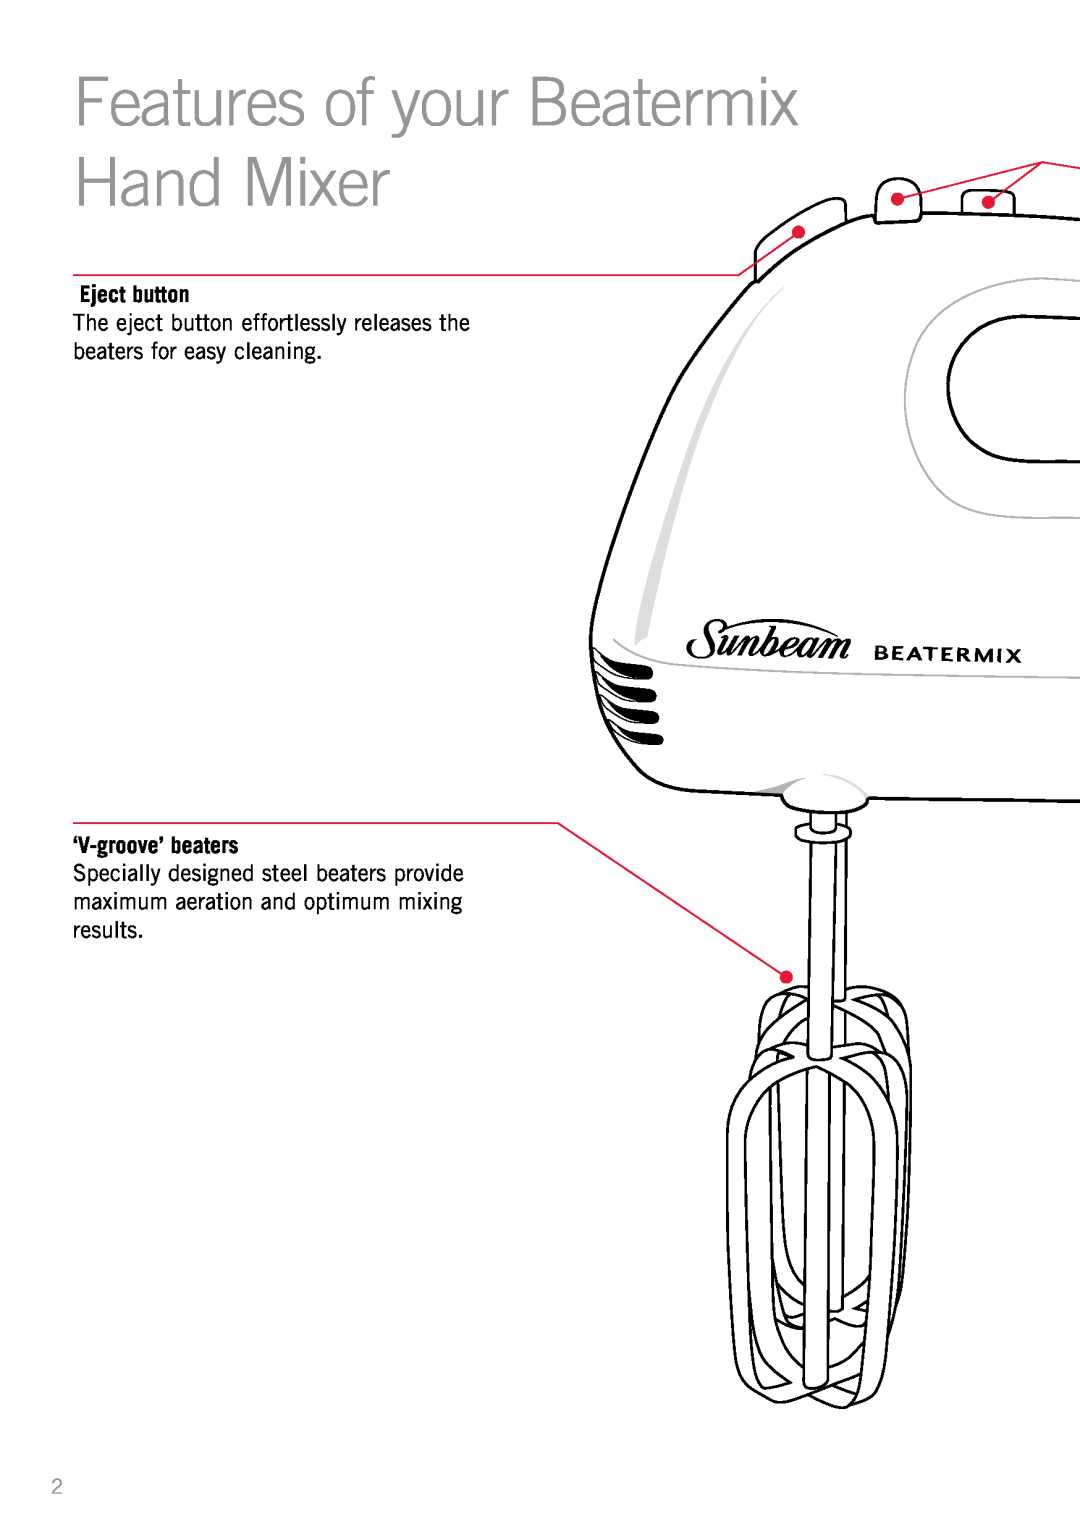 Sunbeam JM3250 manual Features of your Beatermix Hand Mixer, Eject button, ‘V-groove’ beaters 